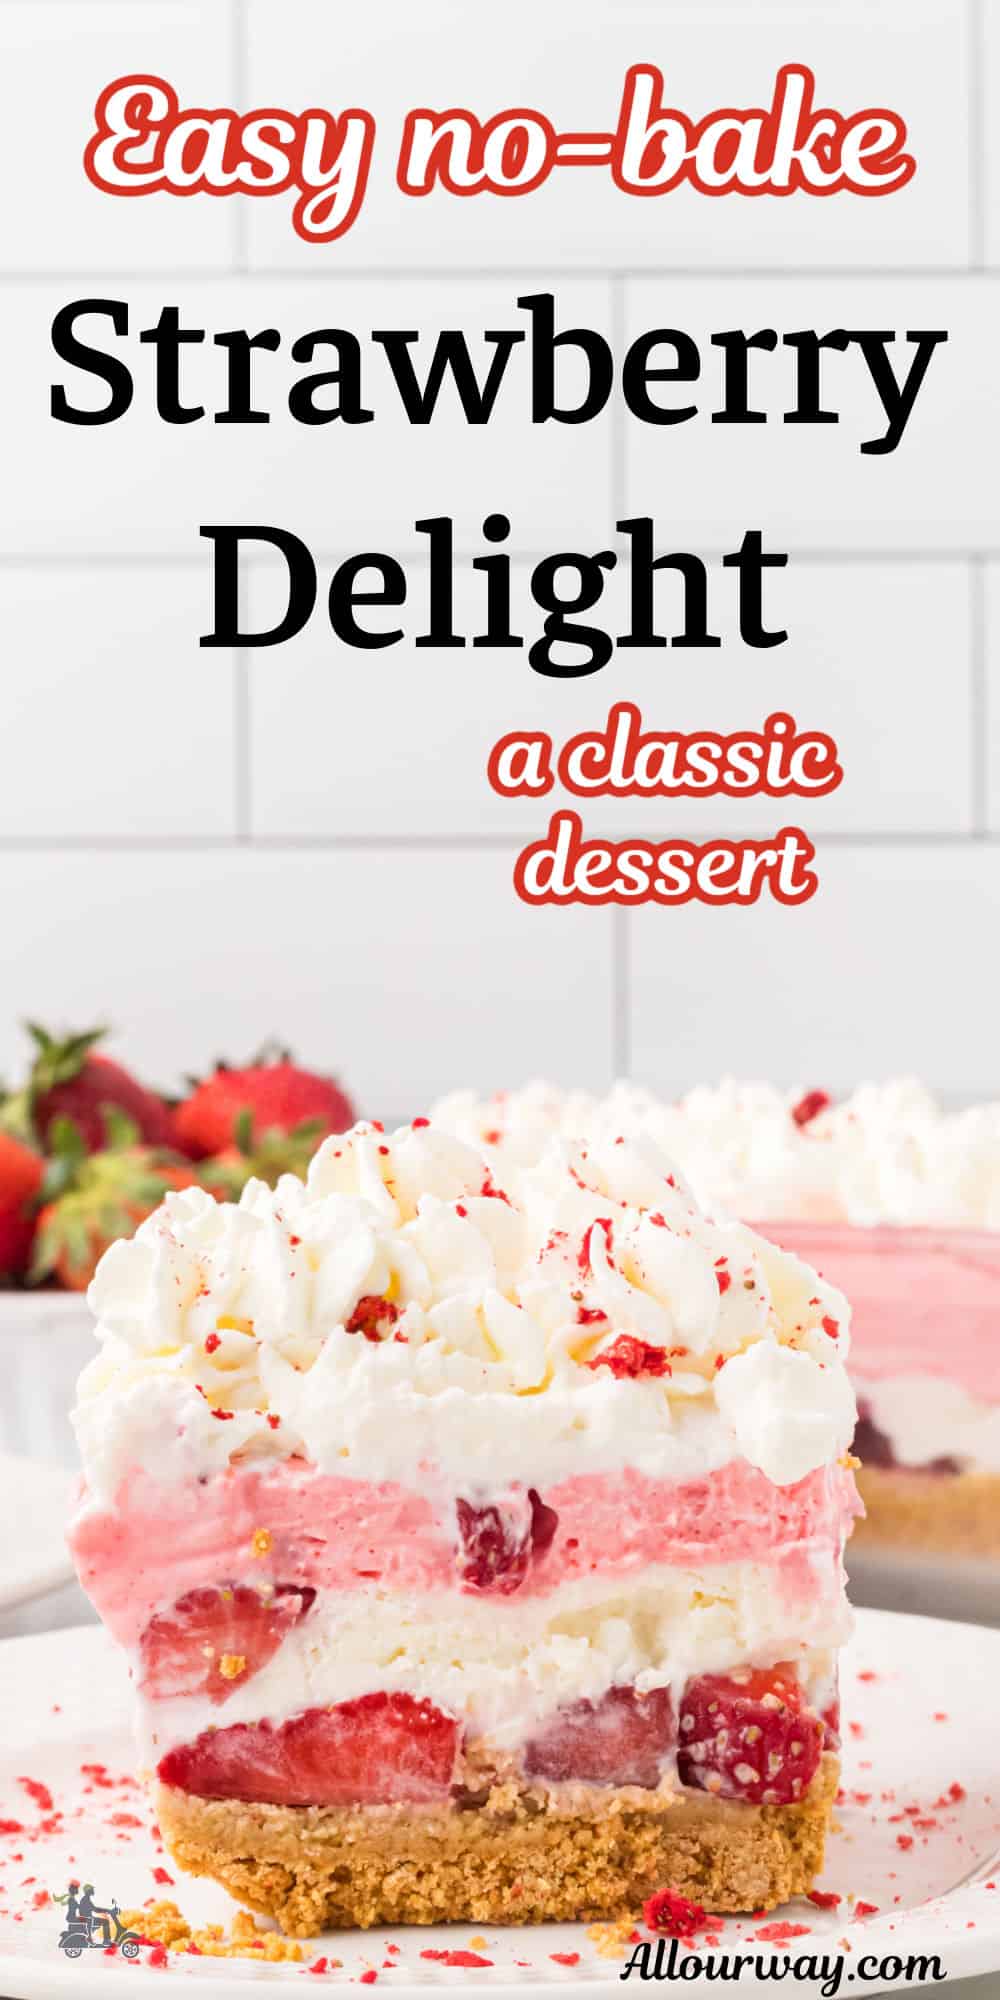 Try this Easy No Bake Homemade Strawberry Delight recipe. Made with fresh strawberries, a graham cracker base, jello, and homemade whipped cream, this dessert is the perfect solution to your baking woes. Indulge in a delicious fruit treat without the fuss of turning on the oven.